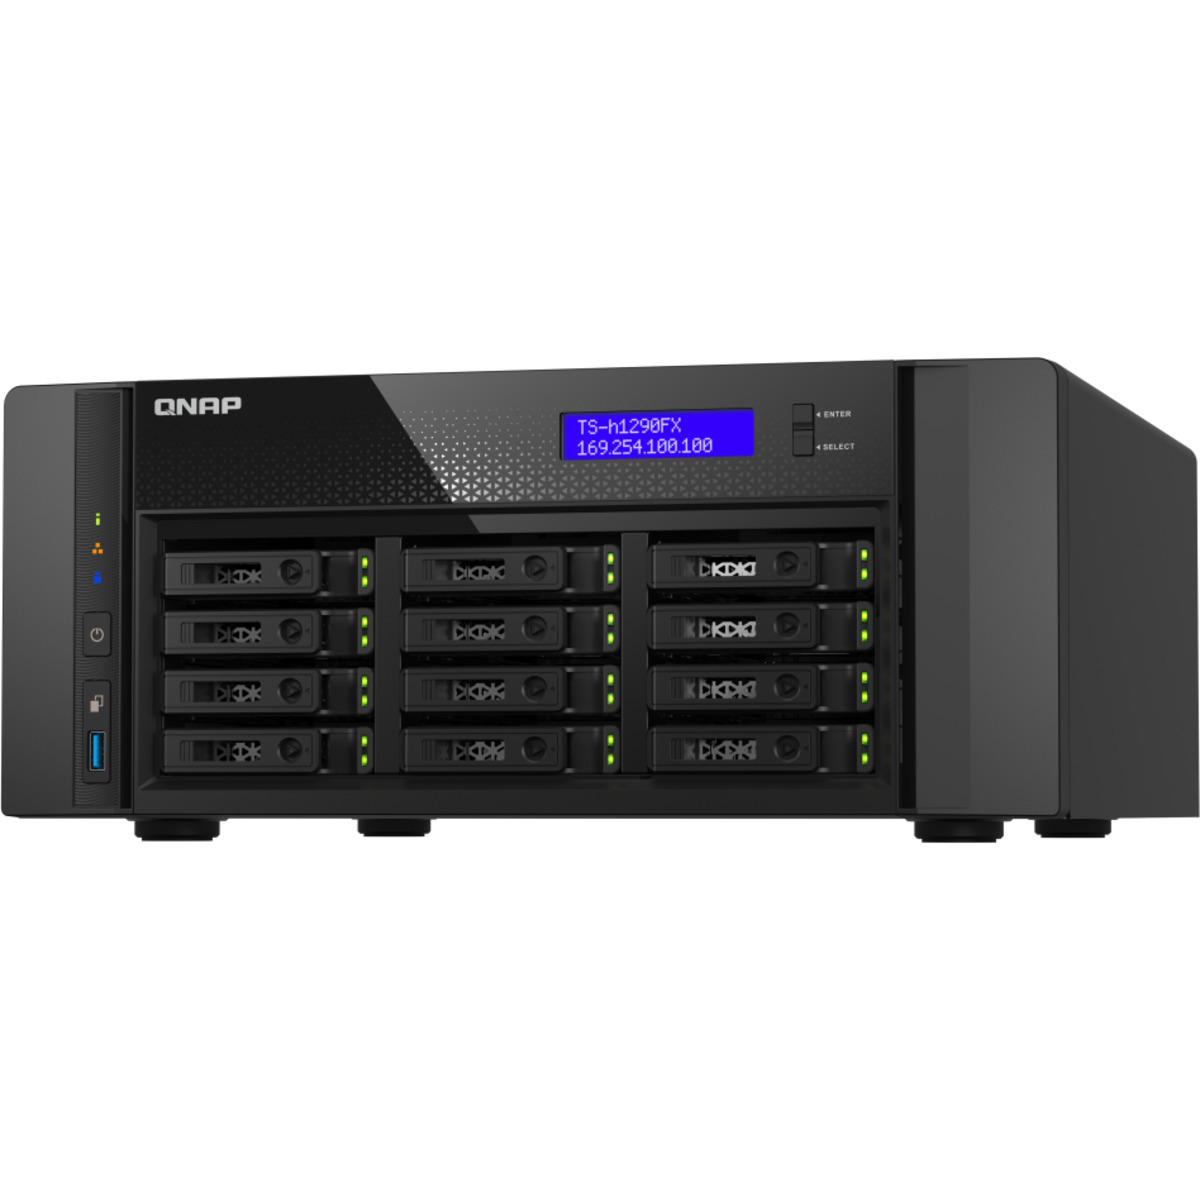 QNAP TS-h1290FX QuTS 7302P hero Edition 14tb 12-Bay Desktop Large Business / Enterprise NAS - Network Attached Storage Device 7x2tb Western Digital Red SA500 WDS200T1R0A 2.5 560/530MB/s SATA 6Gb/s SSD NAS Class Drives Installed - Burn-In Tested TS-h1290FX QuTS 7302P hero Edition